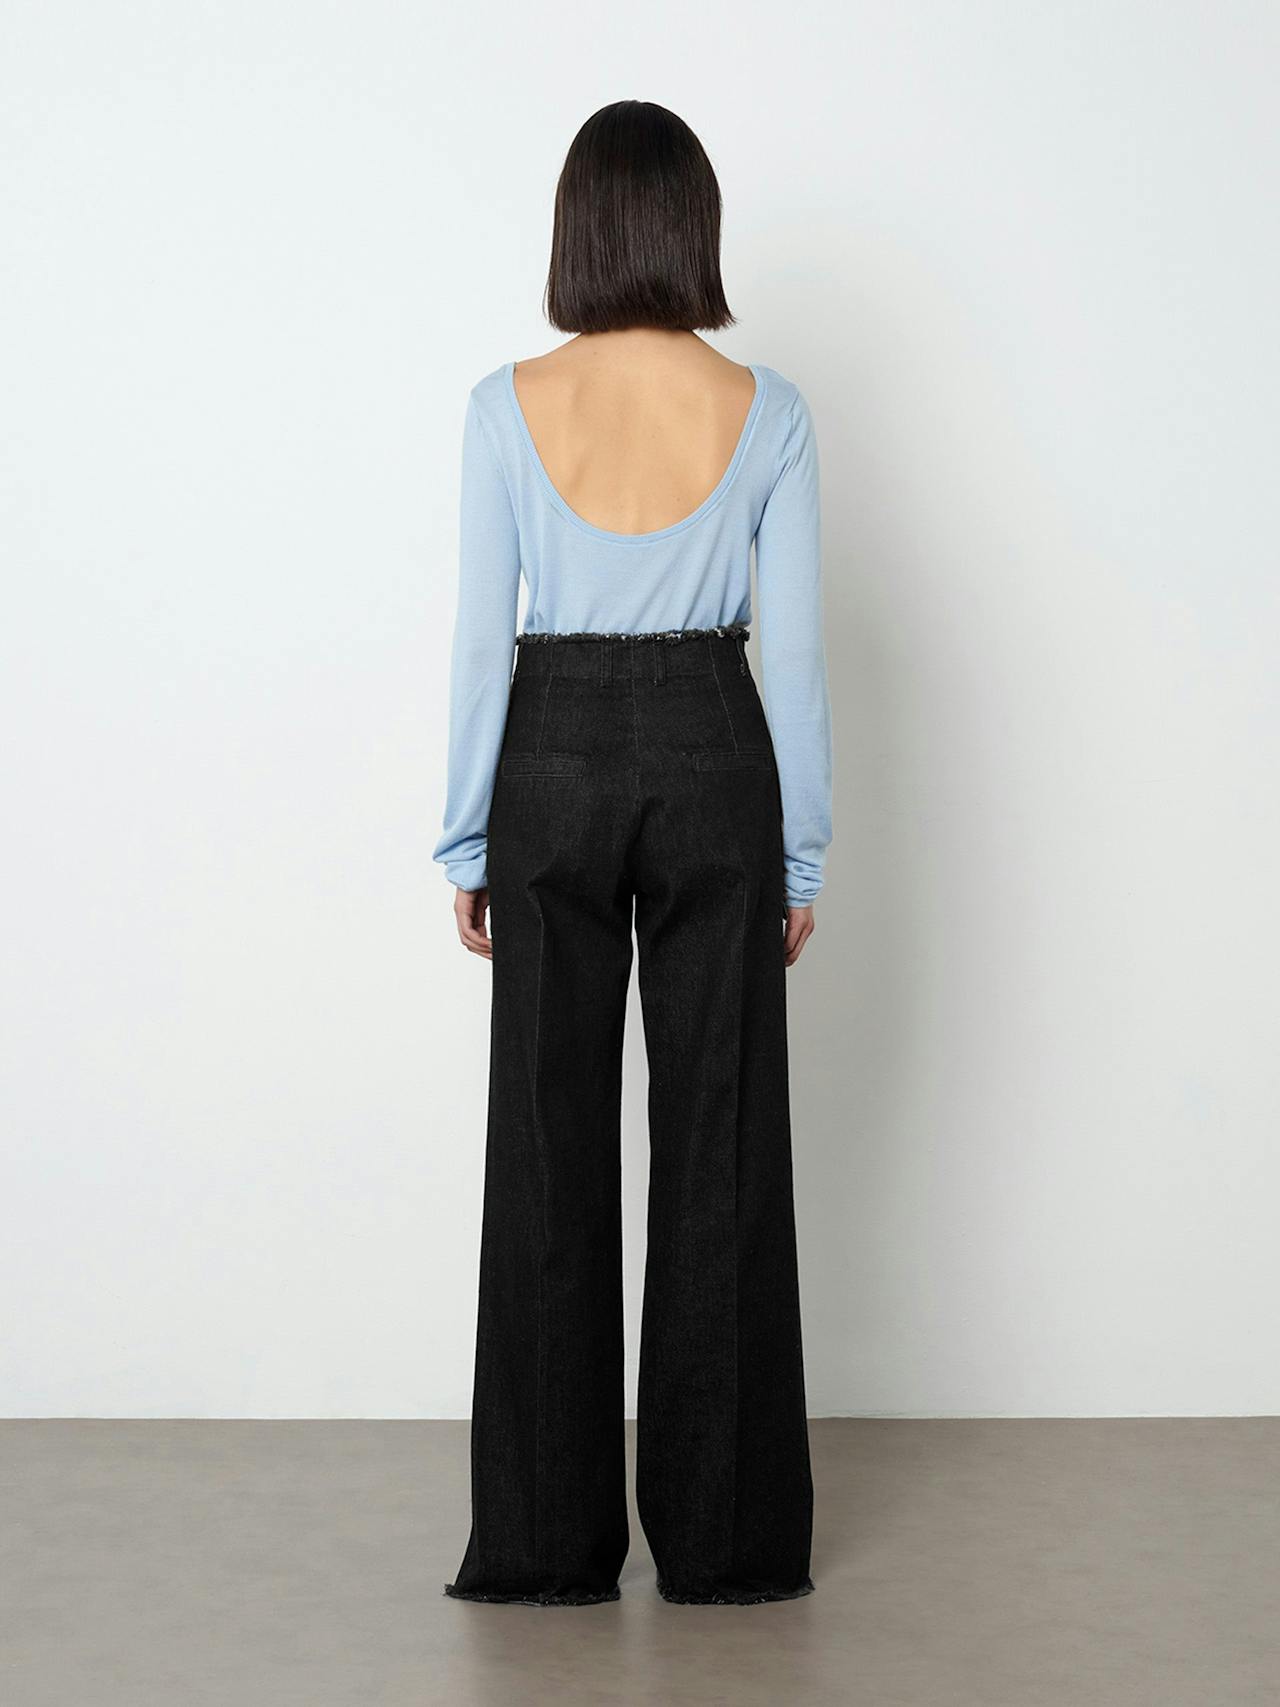 The Ruth jean sits high on the waist, finished in ink black denim with a frayed edge detail at the waist and hem.